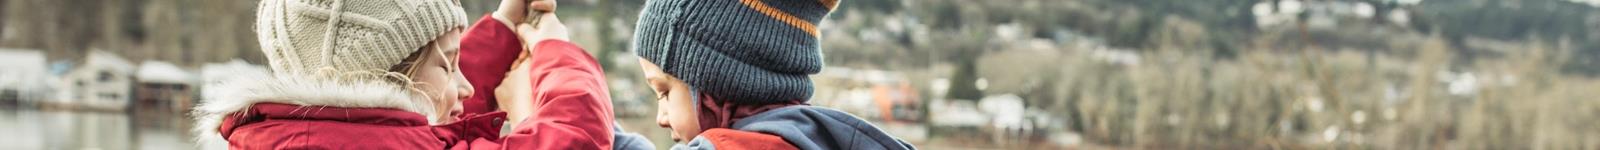 Winter Hats, Scarves for Kids & Teens (6-16) 